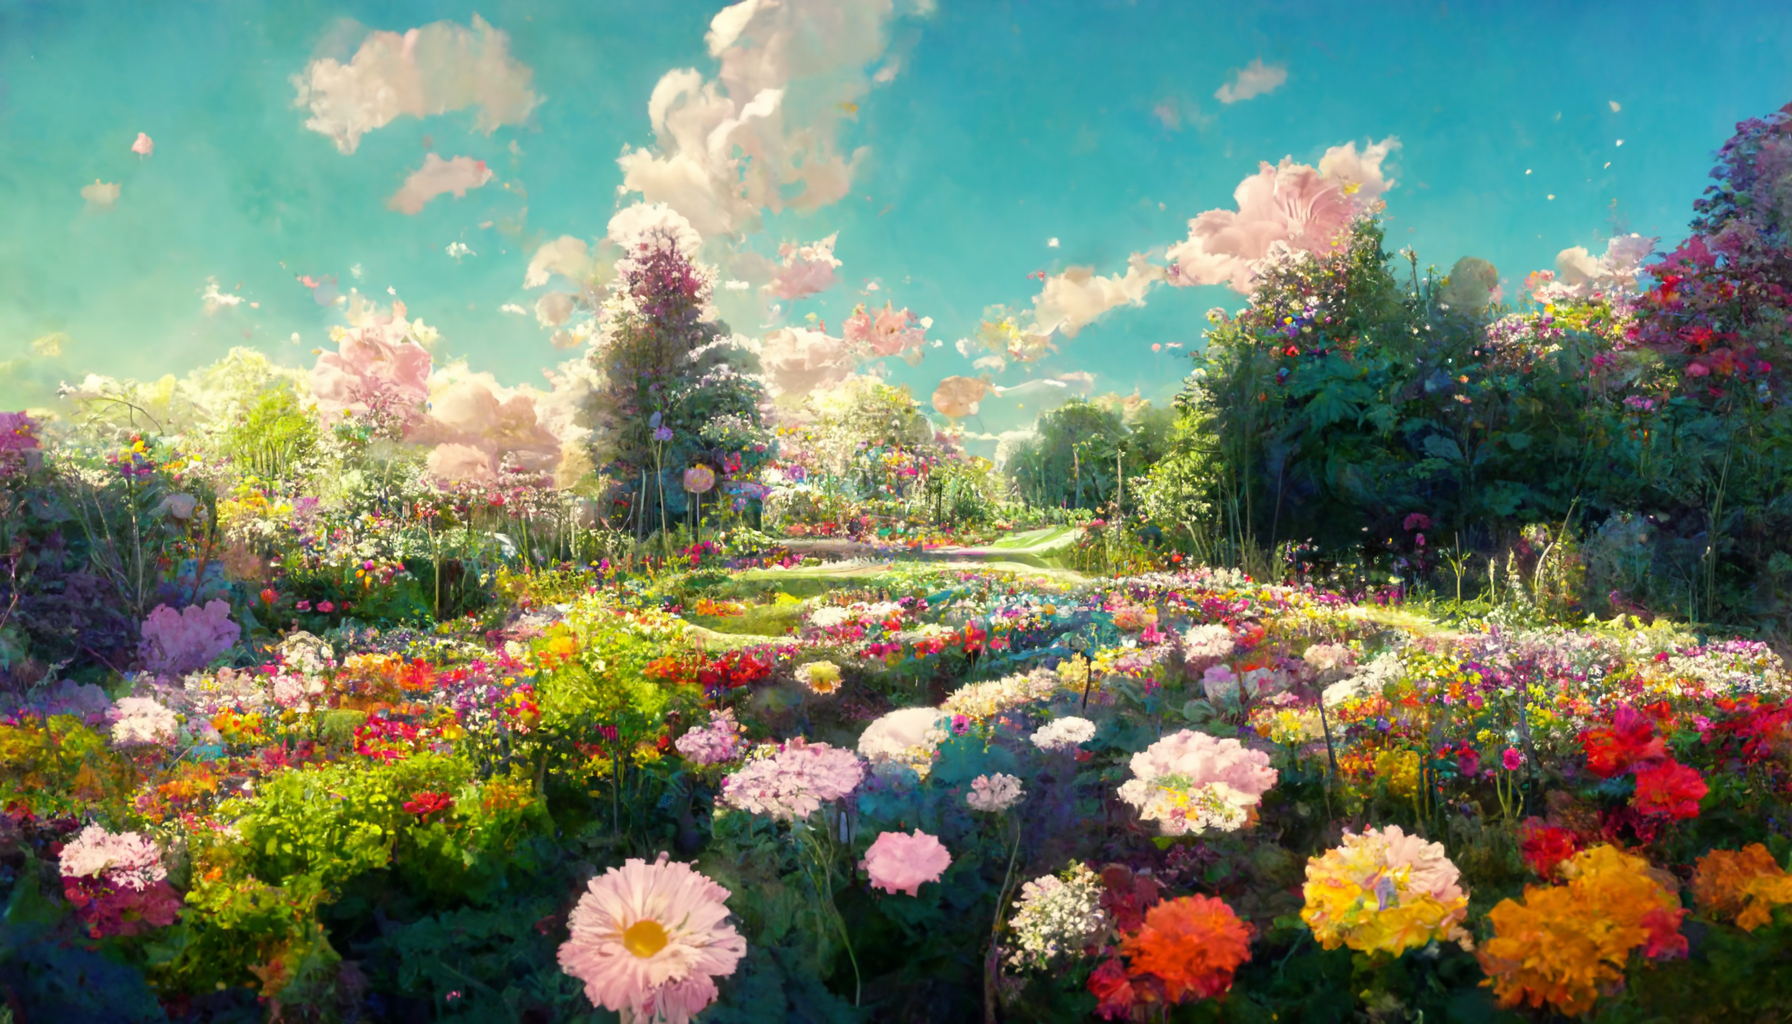 Enchanted Garden Background Illustration 2d Anime Style Stock Photo  Picture And Royalty Free Image Image 192035538